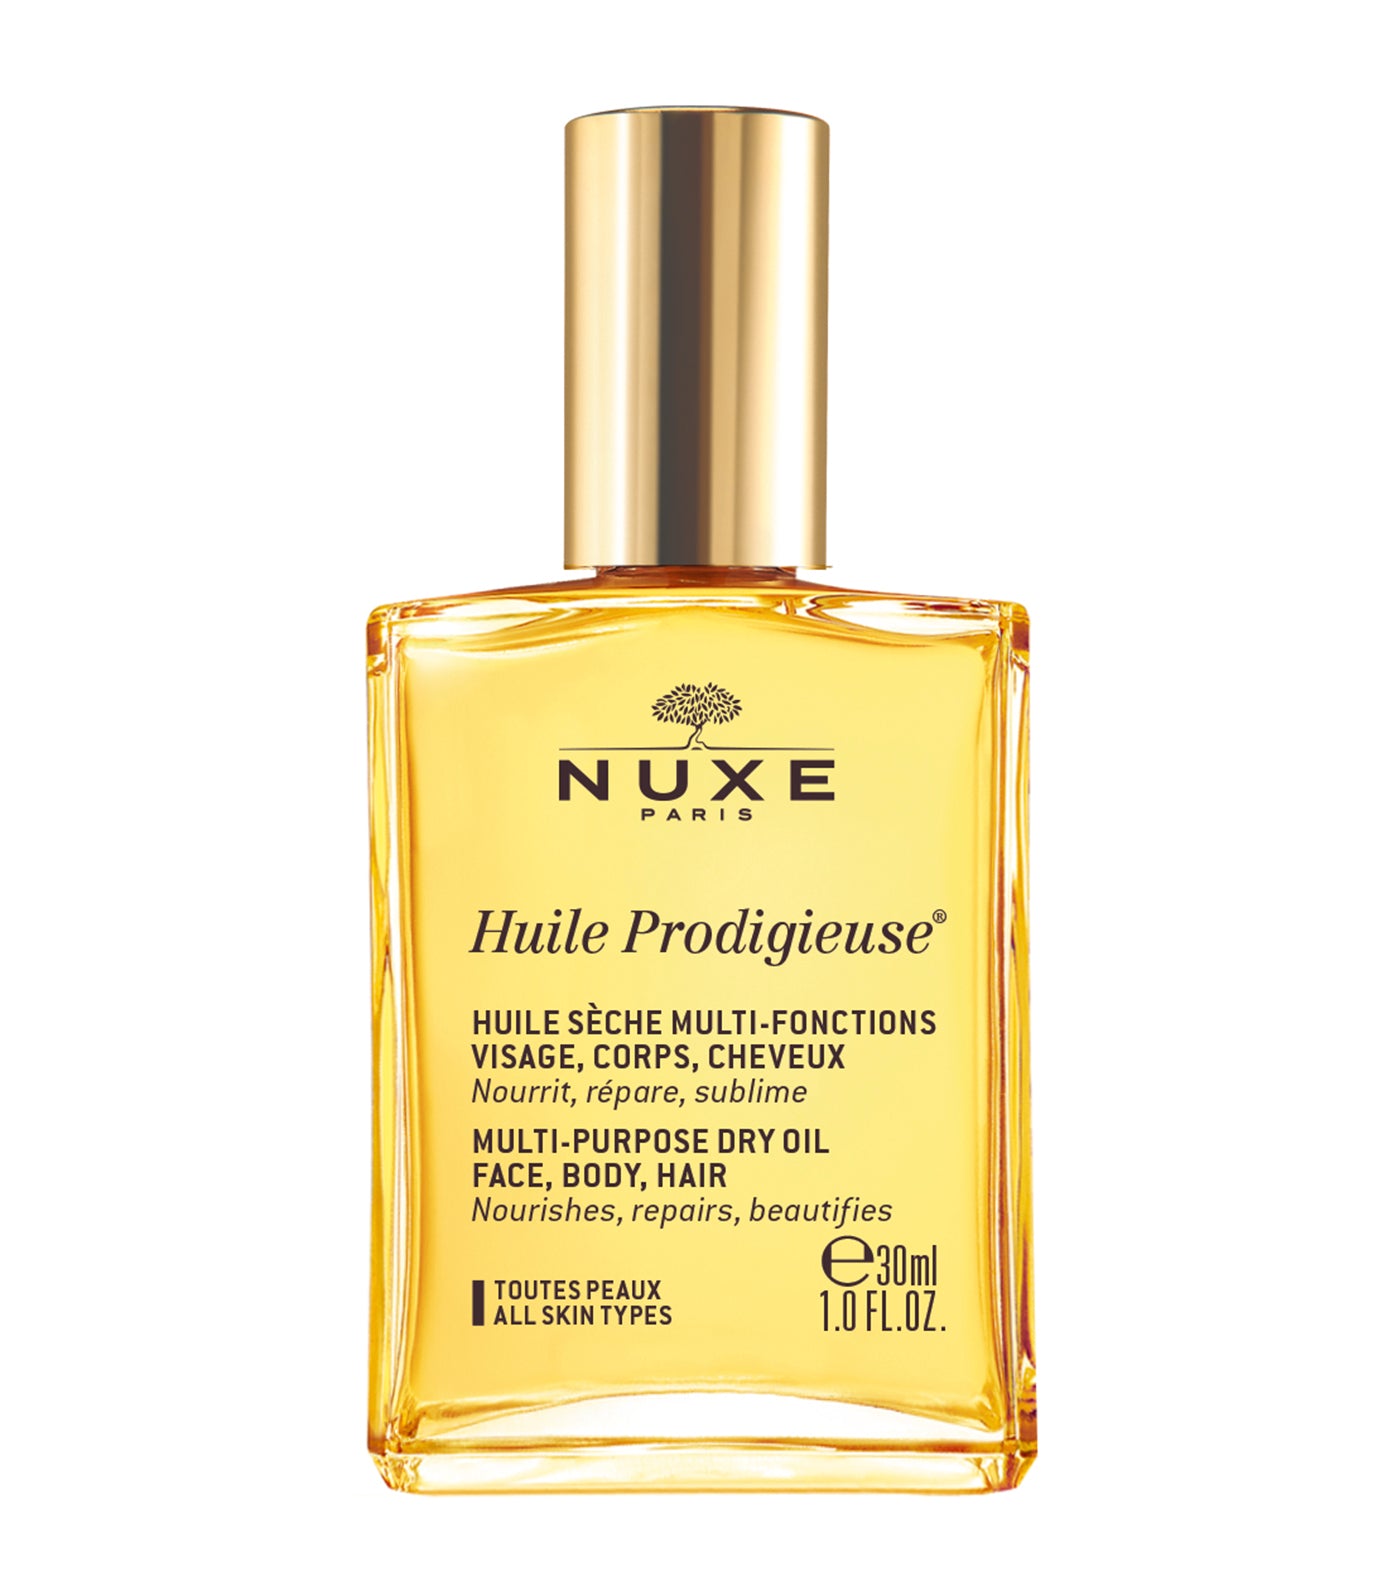 nuxe free huile prodigieuse® beauty dry oil 30ml